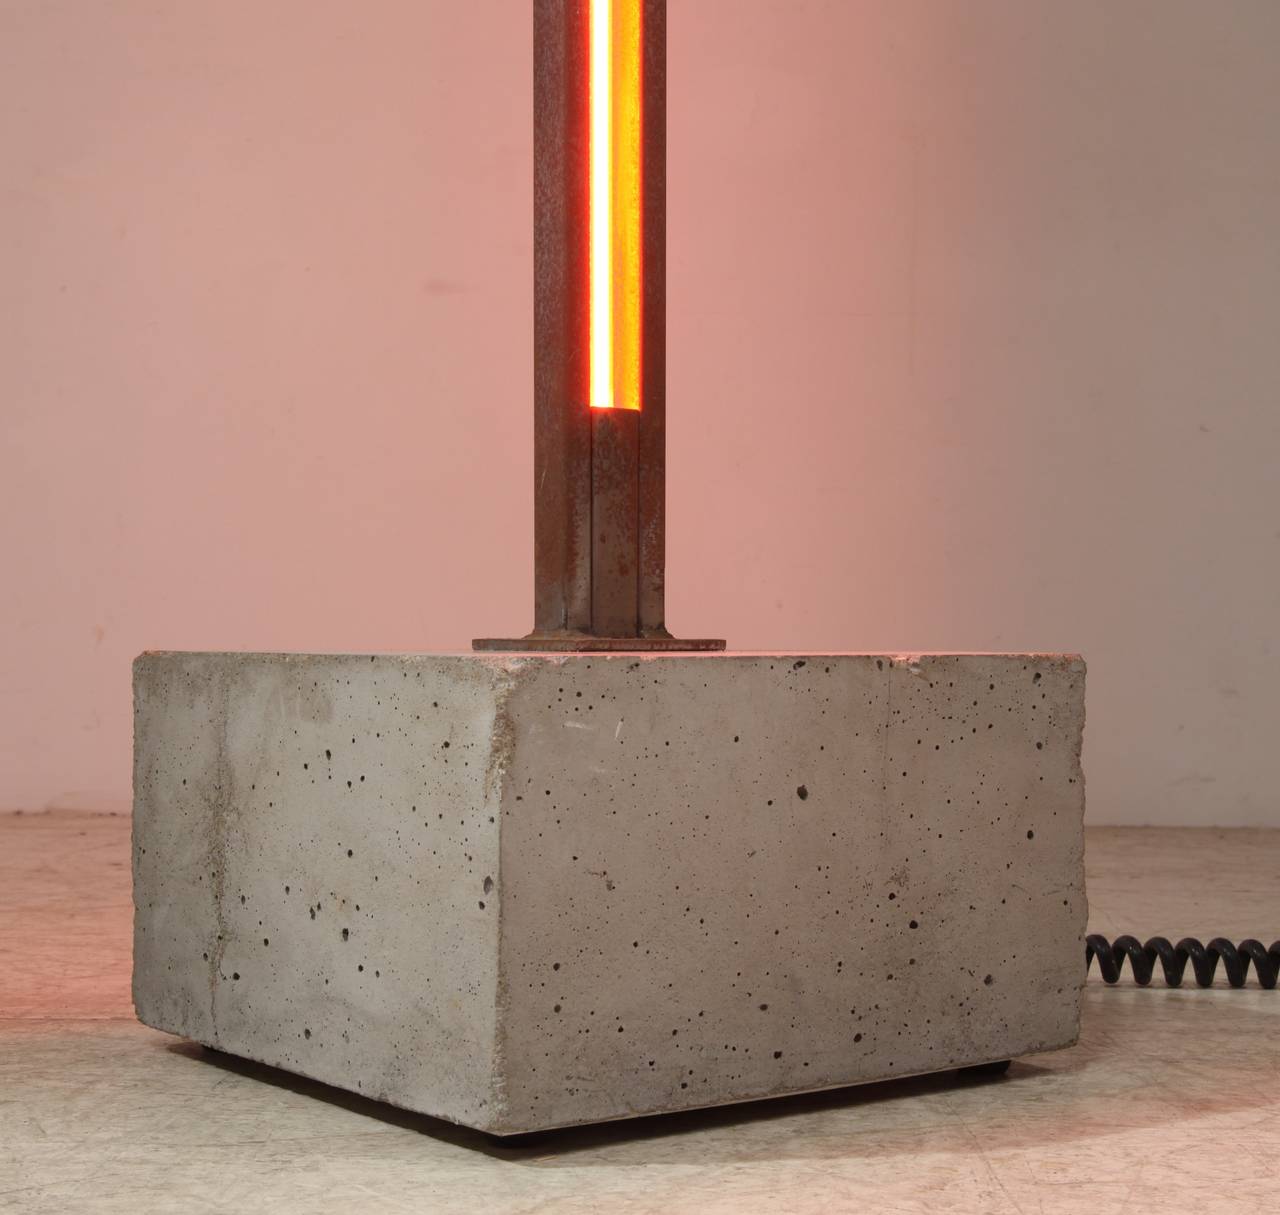 Pentagon Concrete and Steel Neon Floor Lamp by Gerd Arens, Germany, 1980s For Sale 1